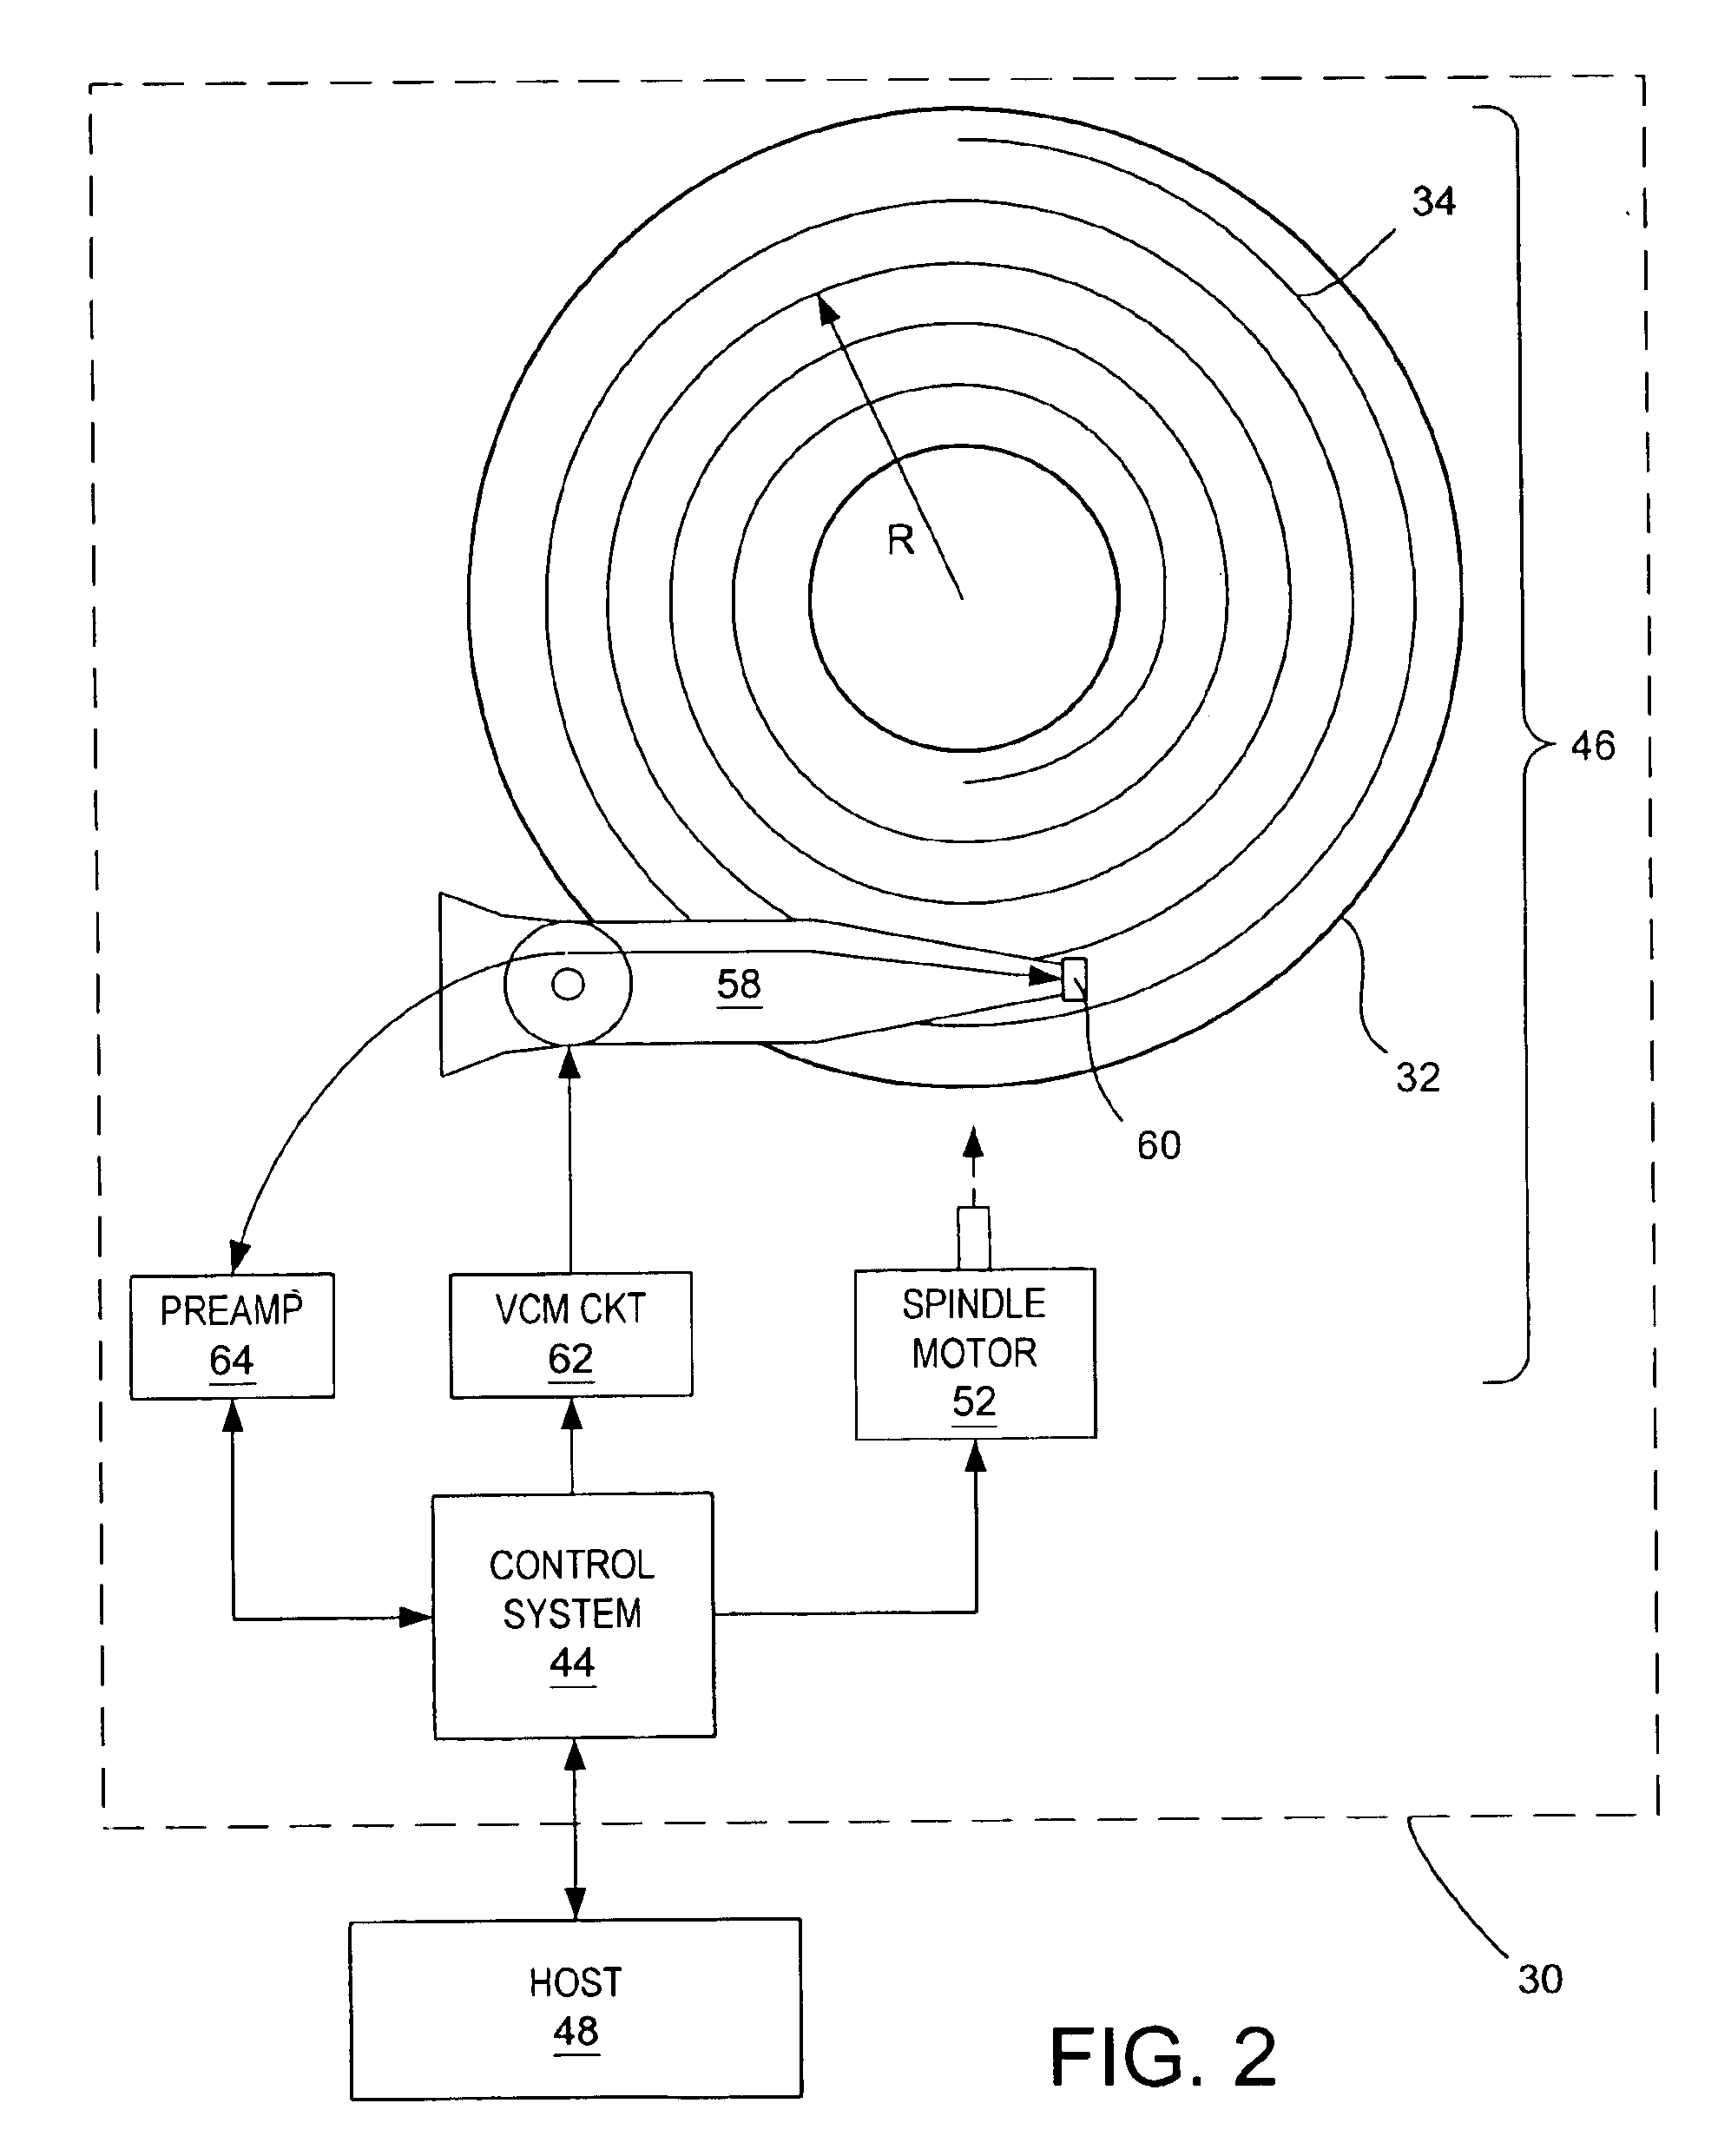 Method for adjusting a delay time for opening a servo sector detection window in a disk drive having a spiral track